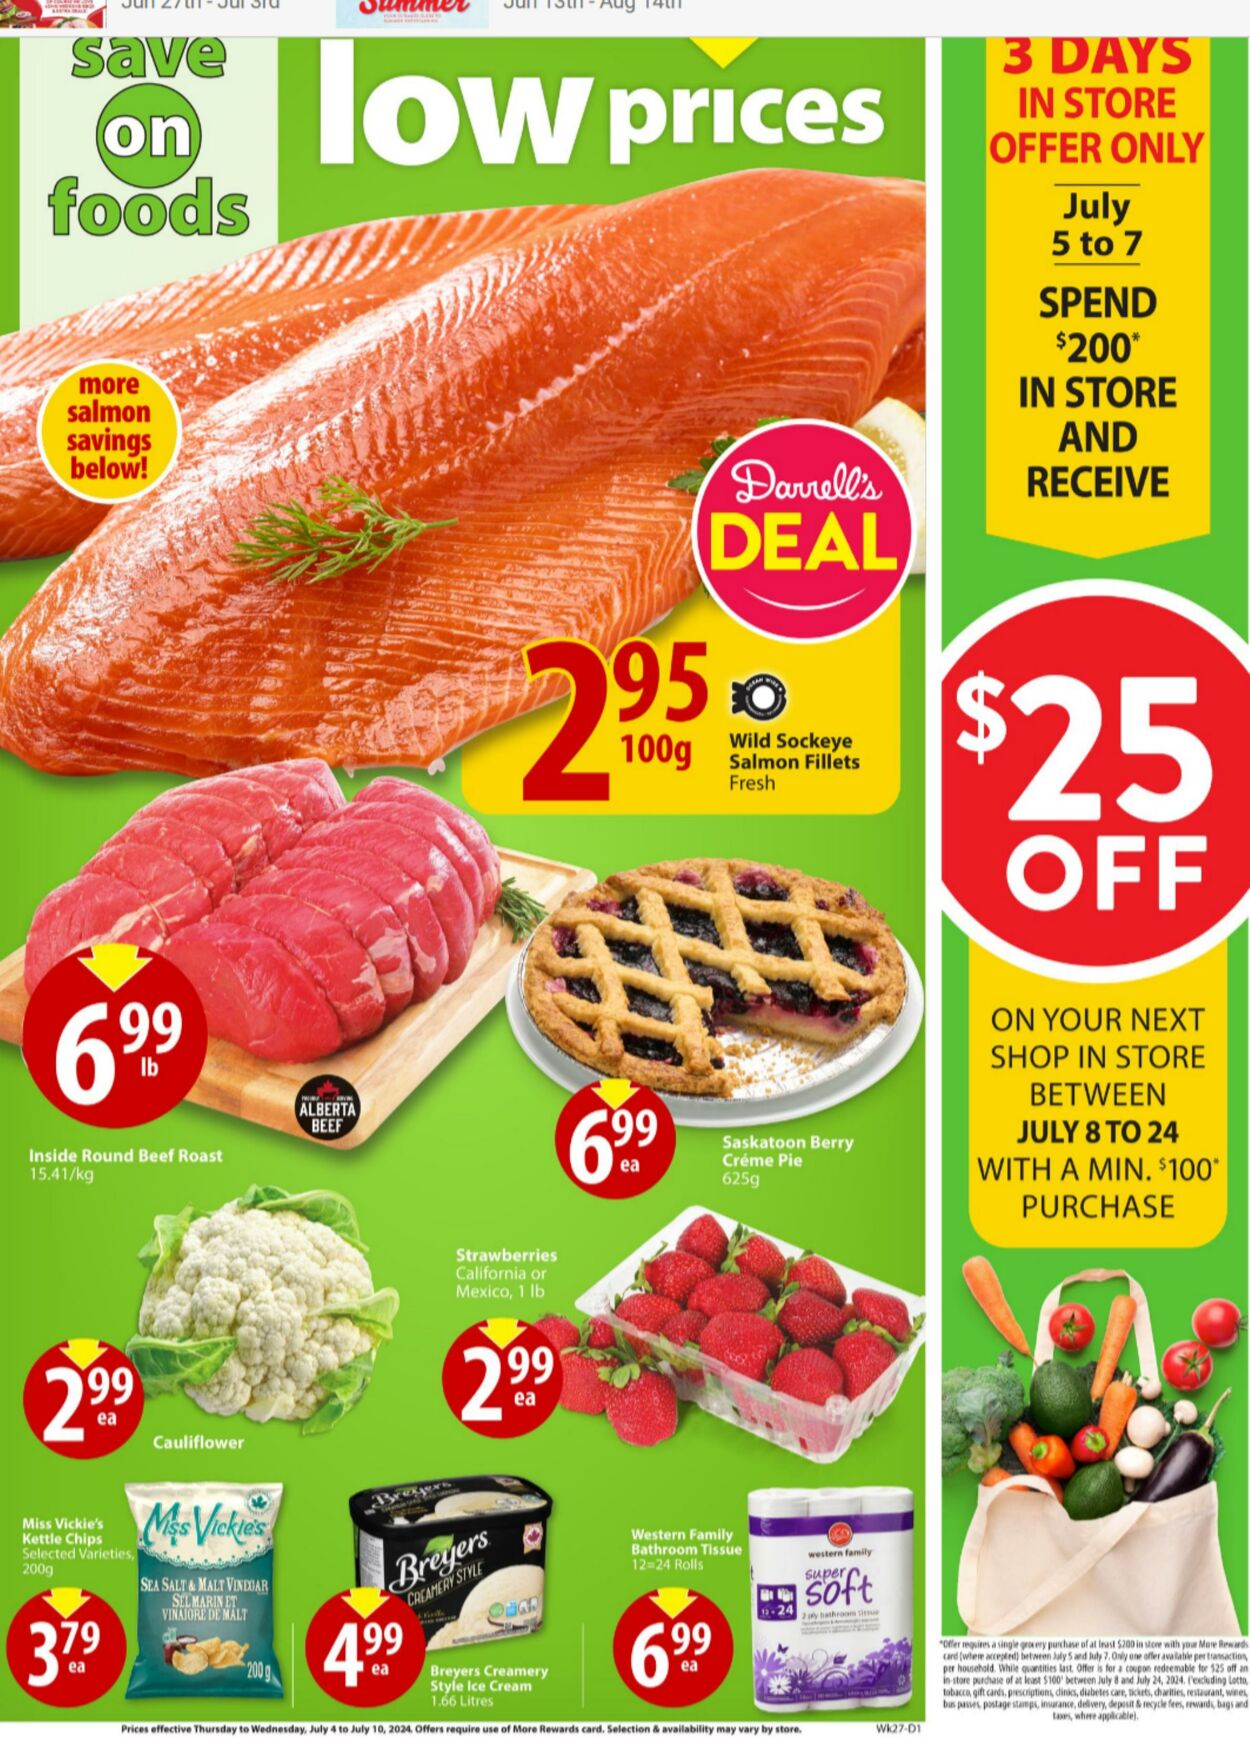 Save-On-Foods Promotional flyers